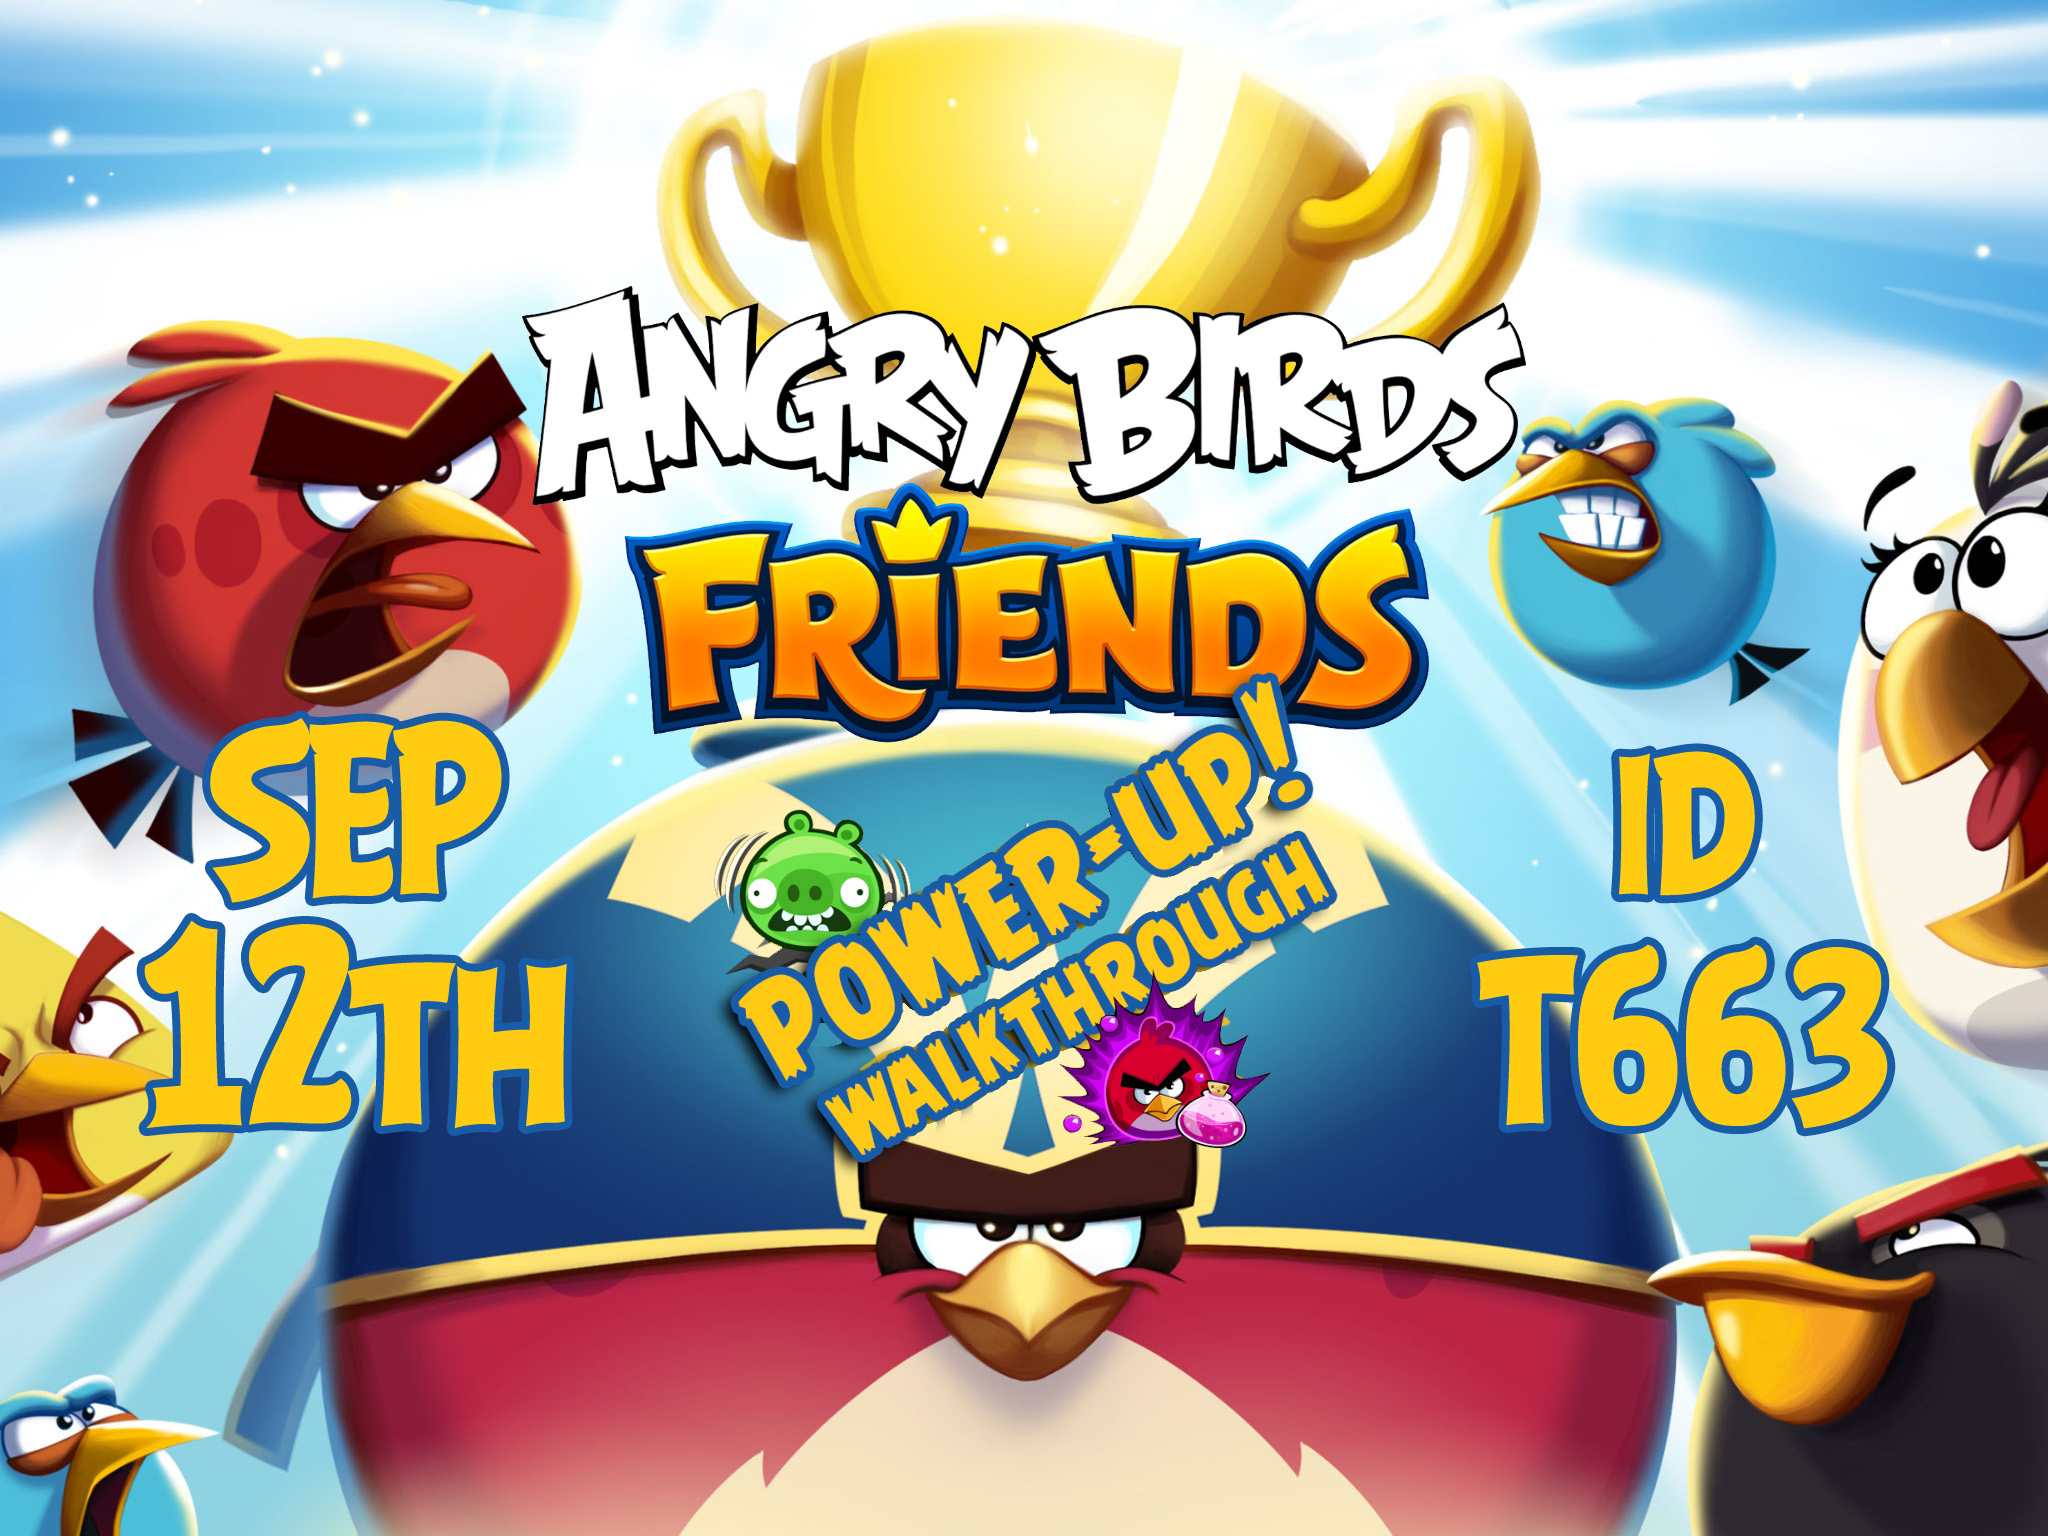 Angry-Birds-Friends-Tournament-T663-Feature-Image-PU